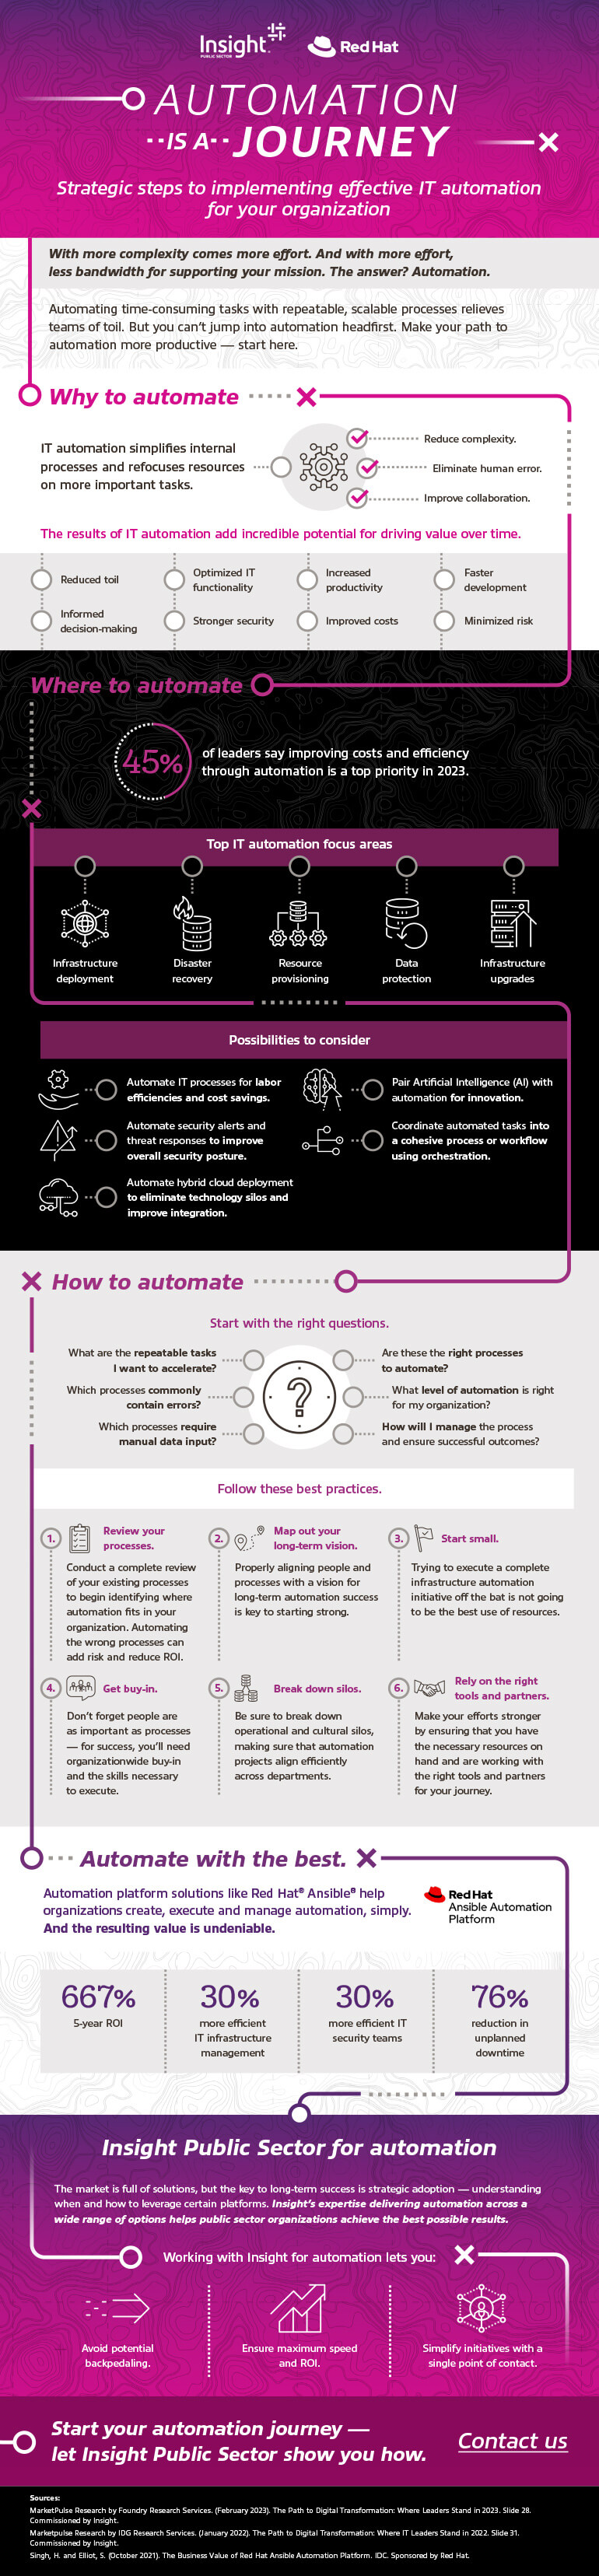 Automation is a journey infographic as transcribed below